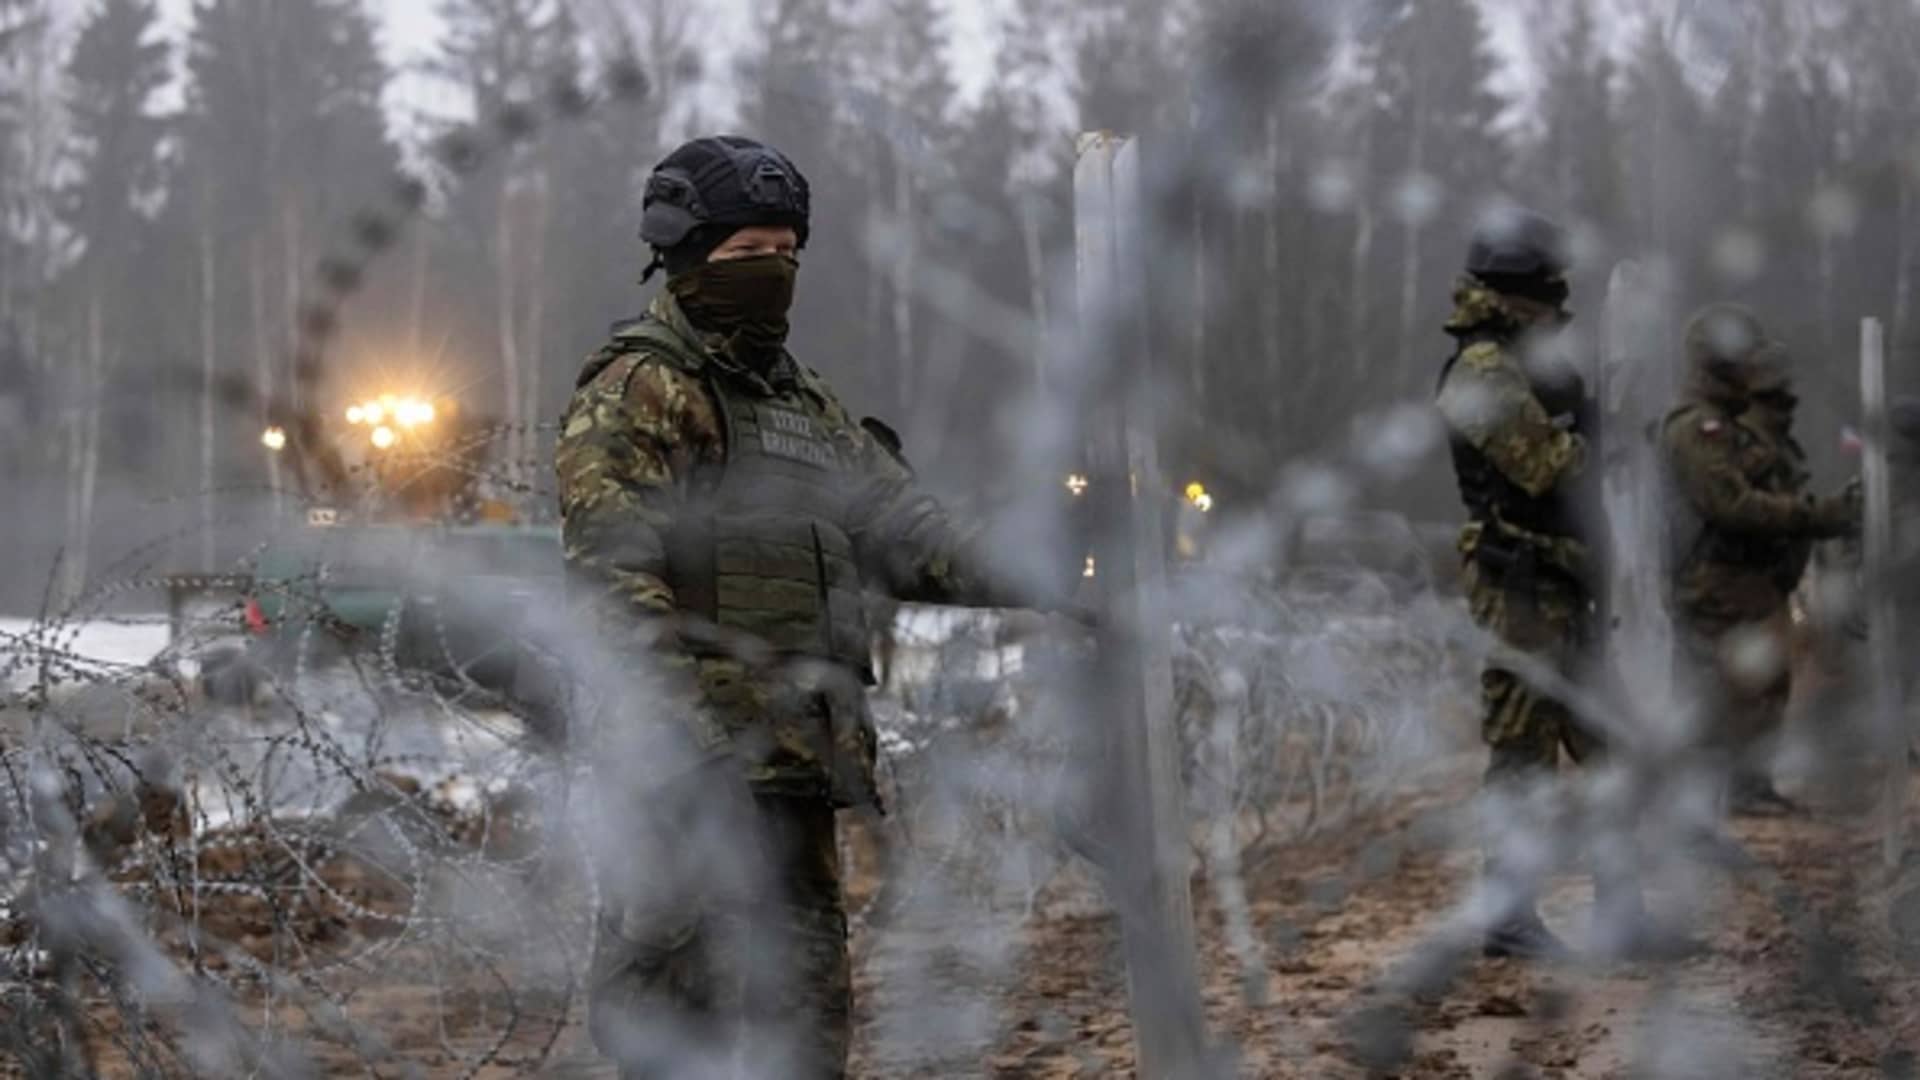 Border guard officers and soldiers are seen during the construction of a border wall along the Polish-Belarus border in Tolcze, Sokolka County, Podlaskie Voivodeship, in north-eastern Poland on January 27, 2022.